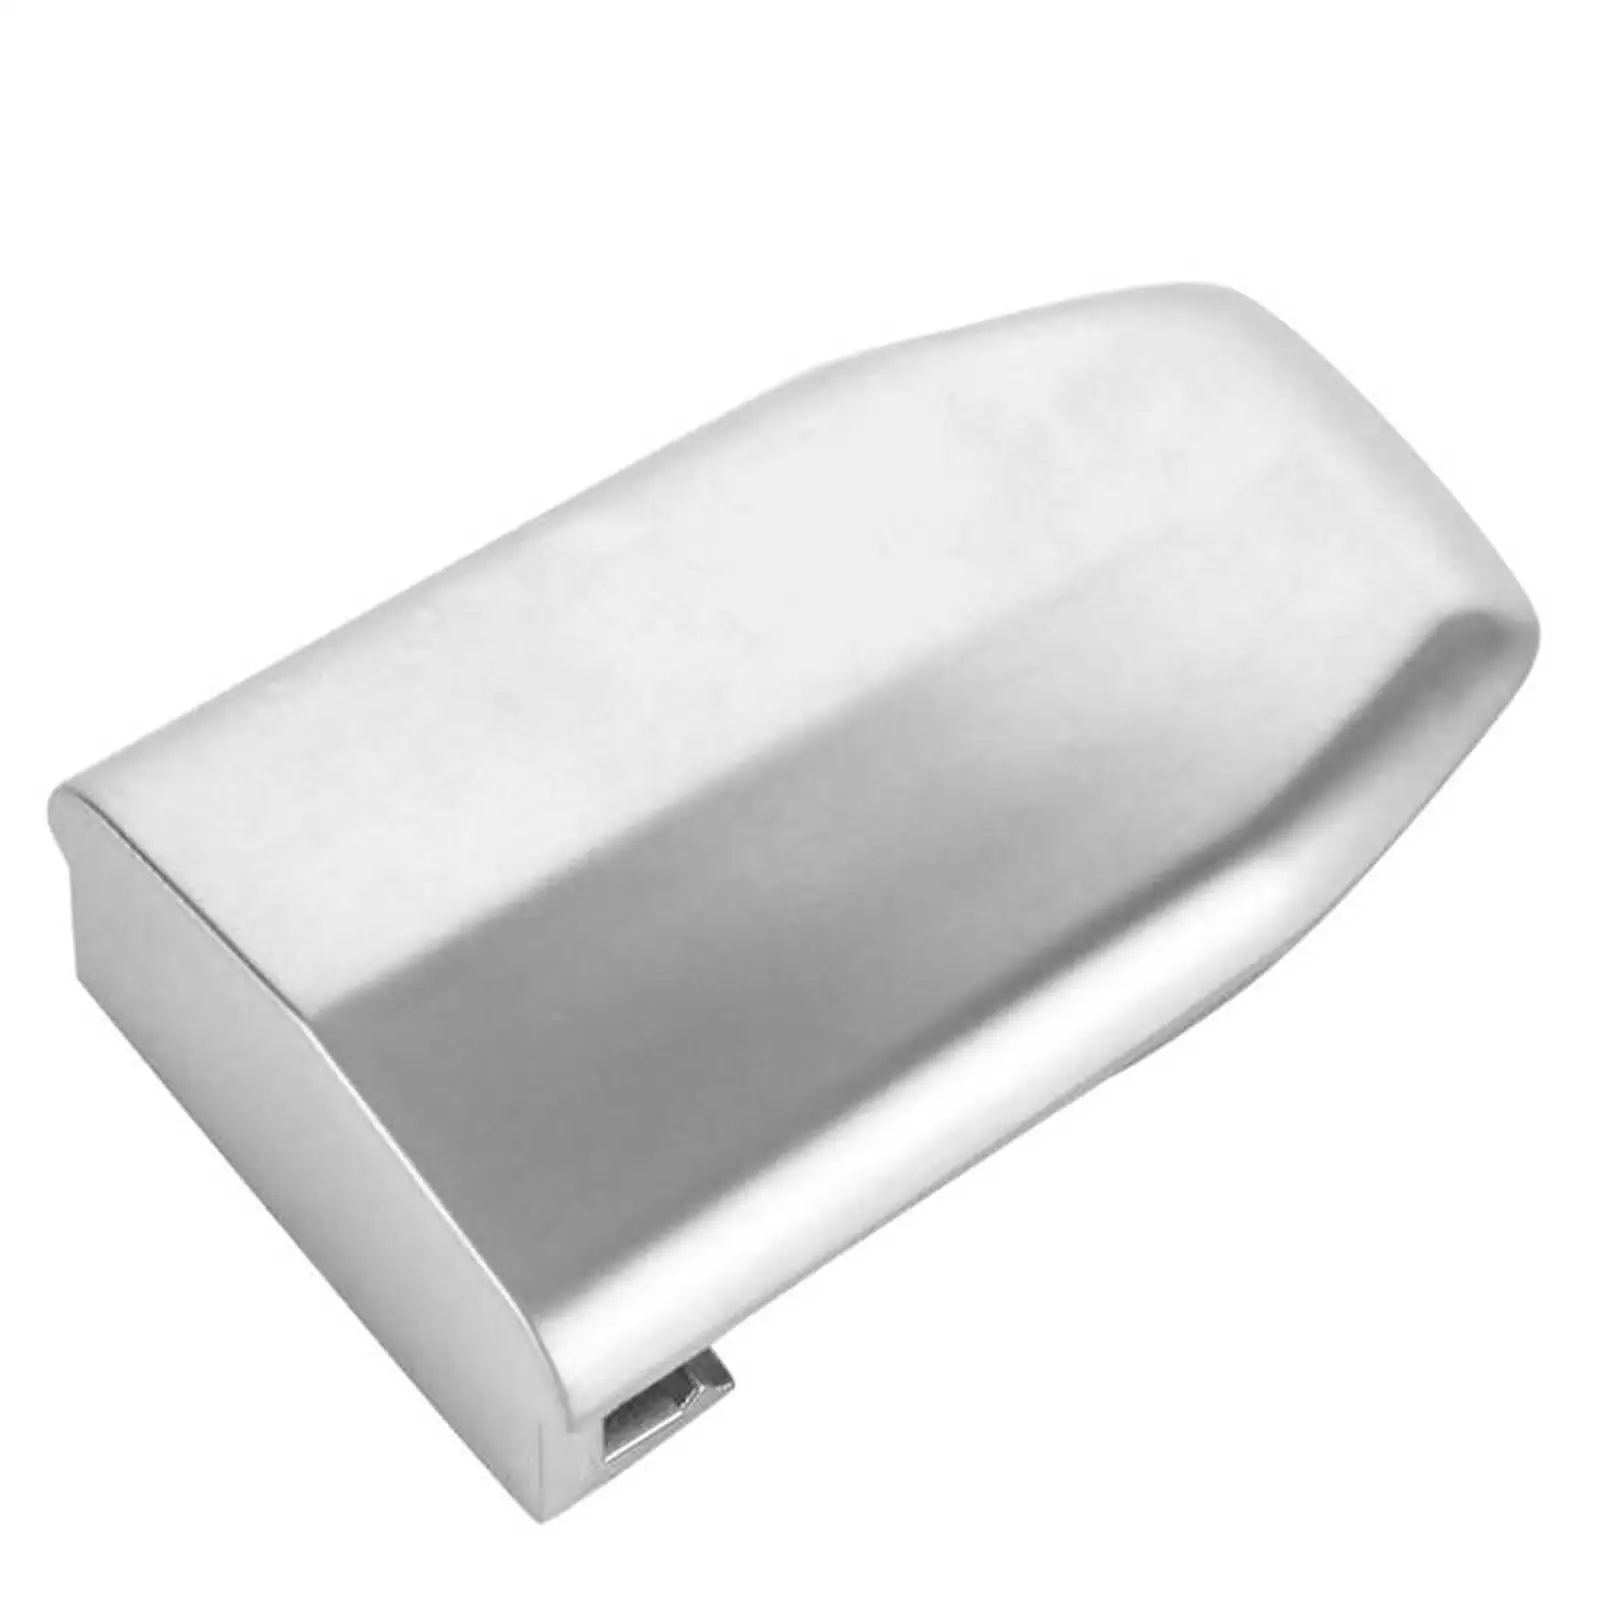 Auto Exterior Front Car Door Handle Lock Cylinder Cover 13596115 Chrome Silver for Escalade High Quality Accessory